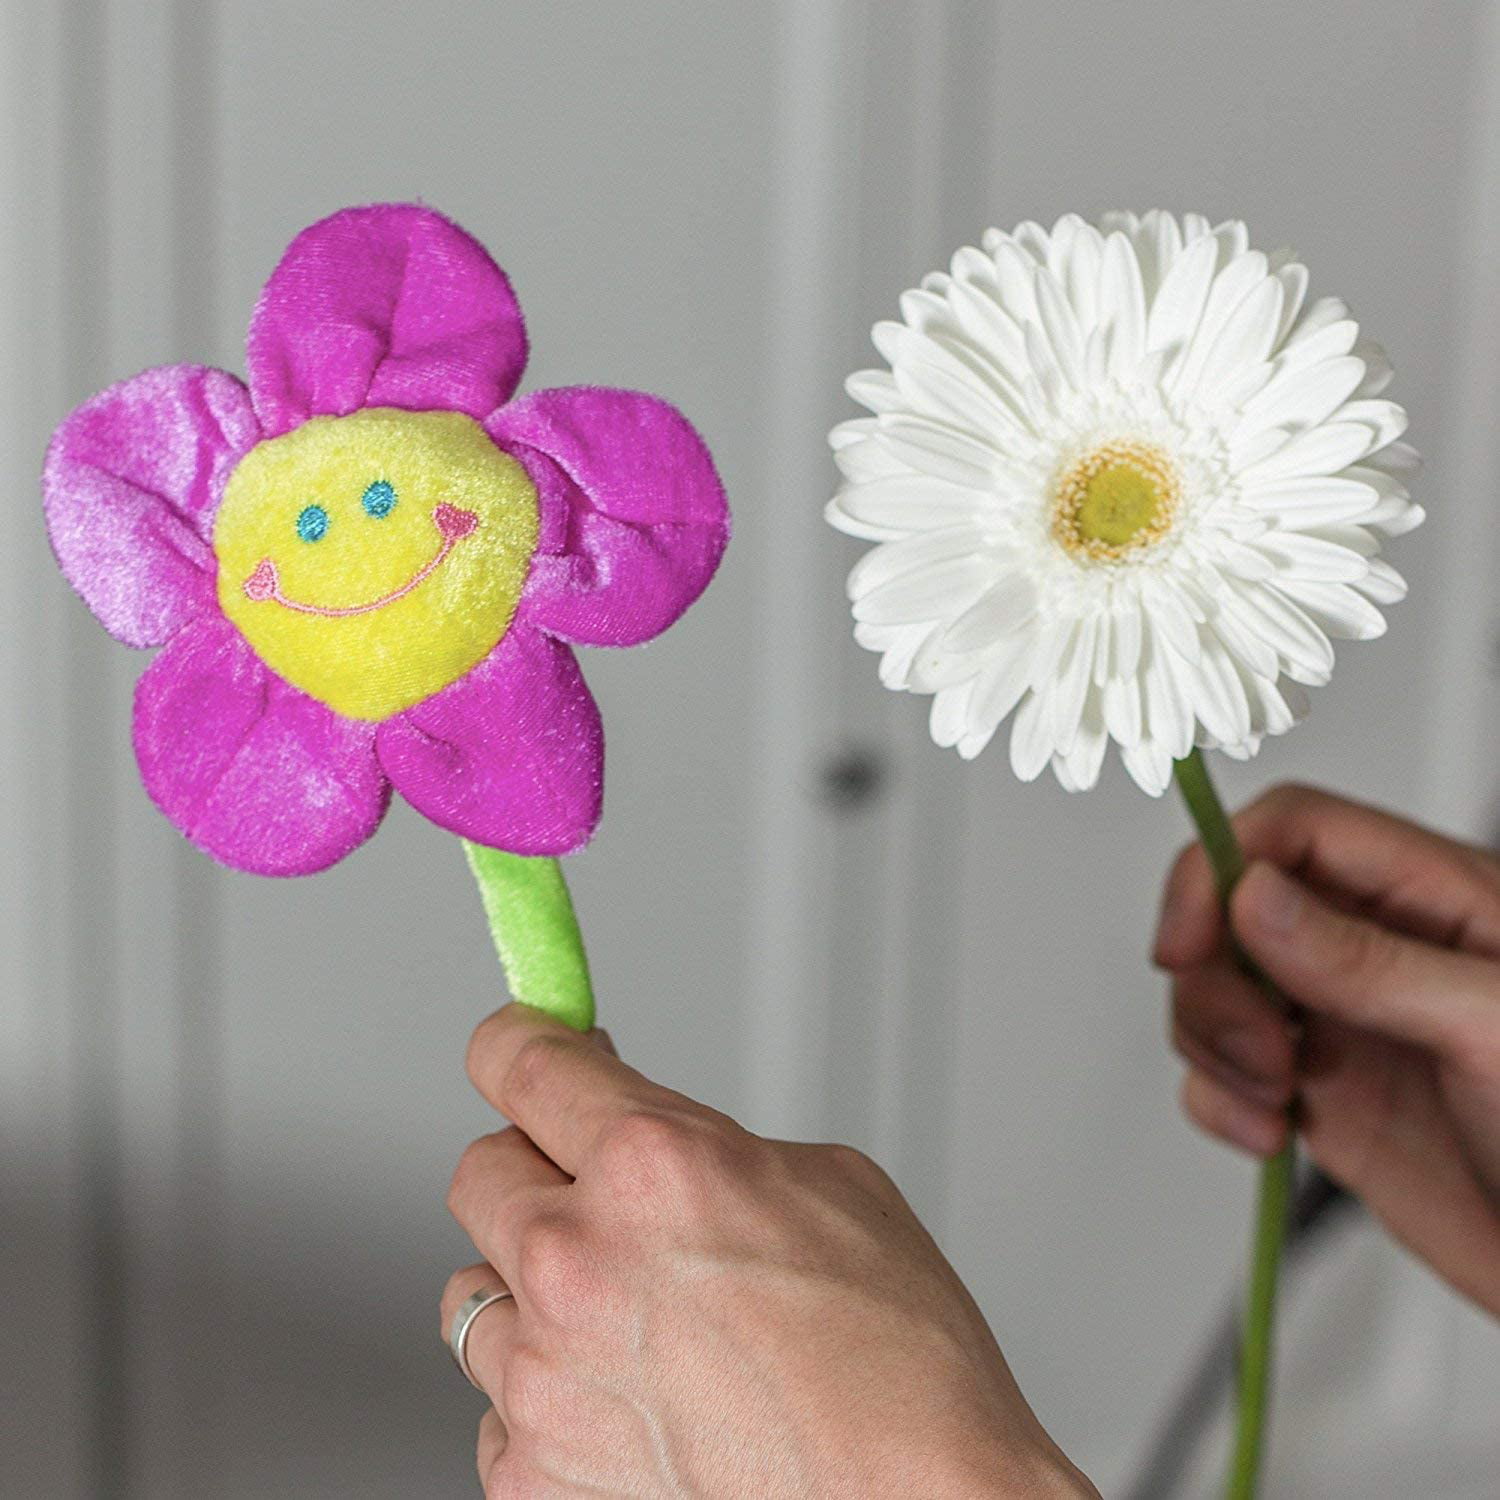 Cute Washable Plush Daisy Sunflower Toy With Smiley Happy Faces Bendable Stems 